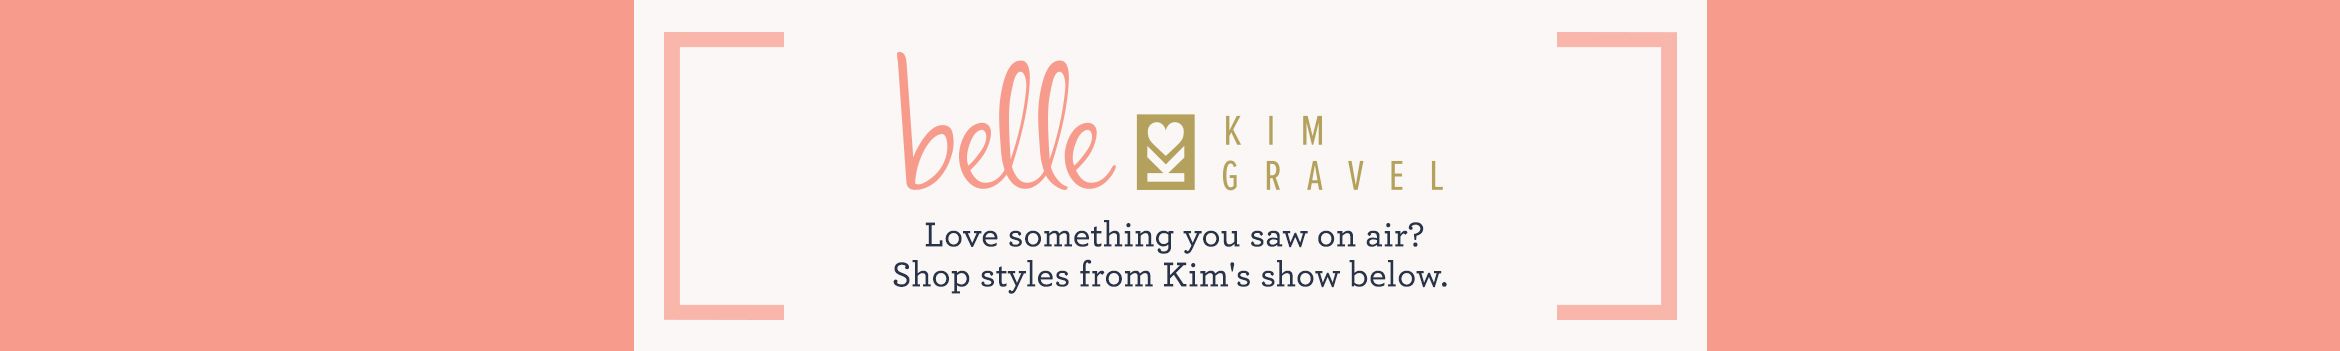 Belle by Kim Gravel Love something you saw on air? Shop styles from Kim's show below. 